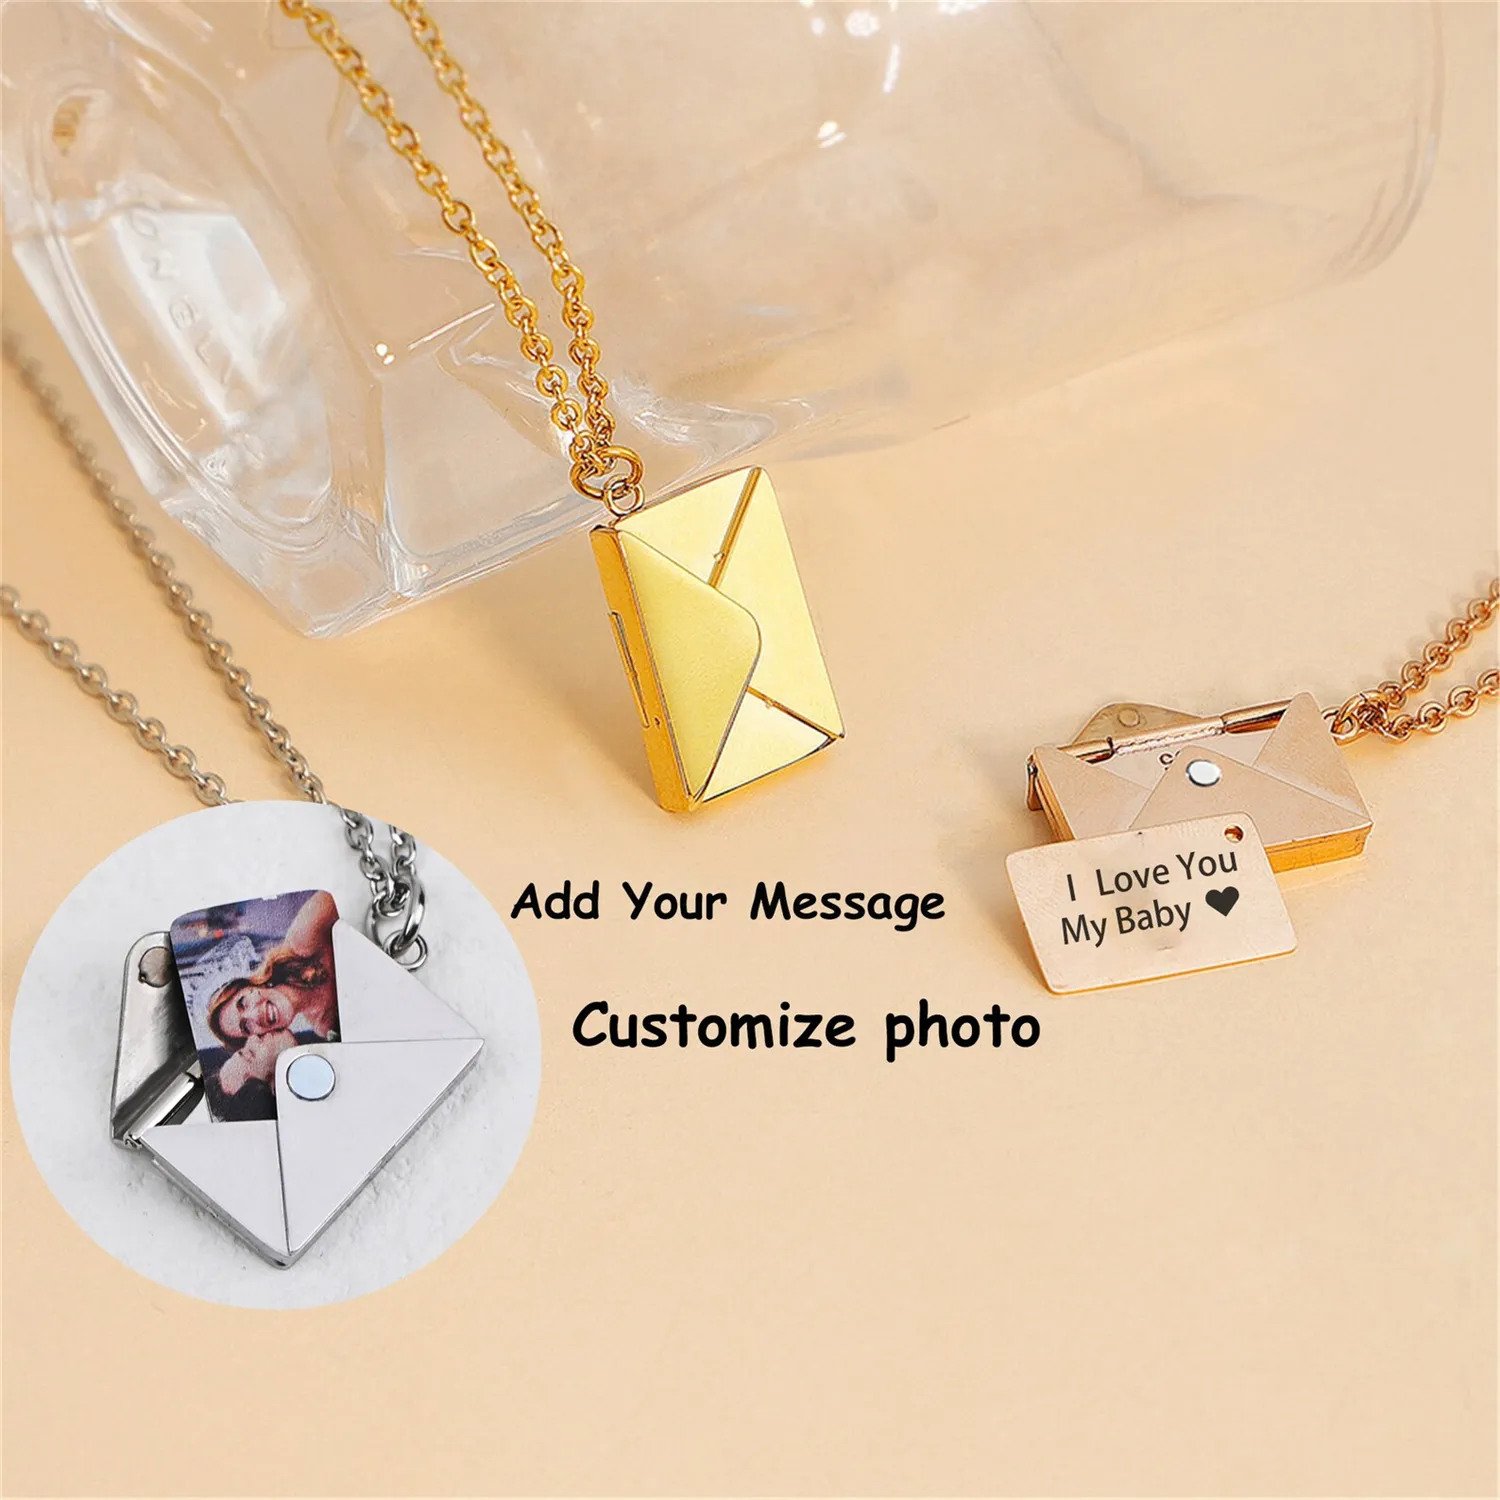 Personalized Custom Envelope Custom Photo Necklace Collar Chain Pendant Engraved Name Jewelry Hidden Photo Jewelry Gift For Her